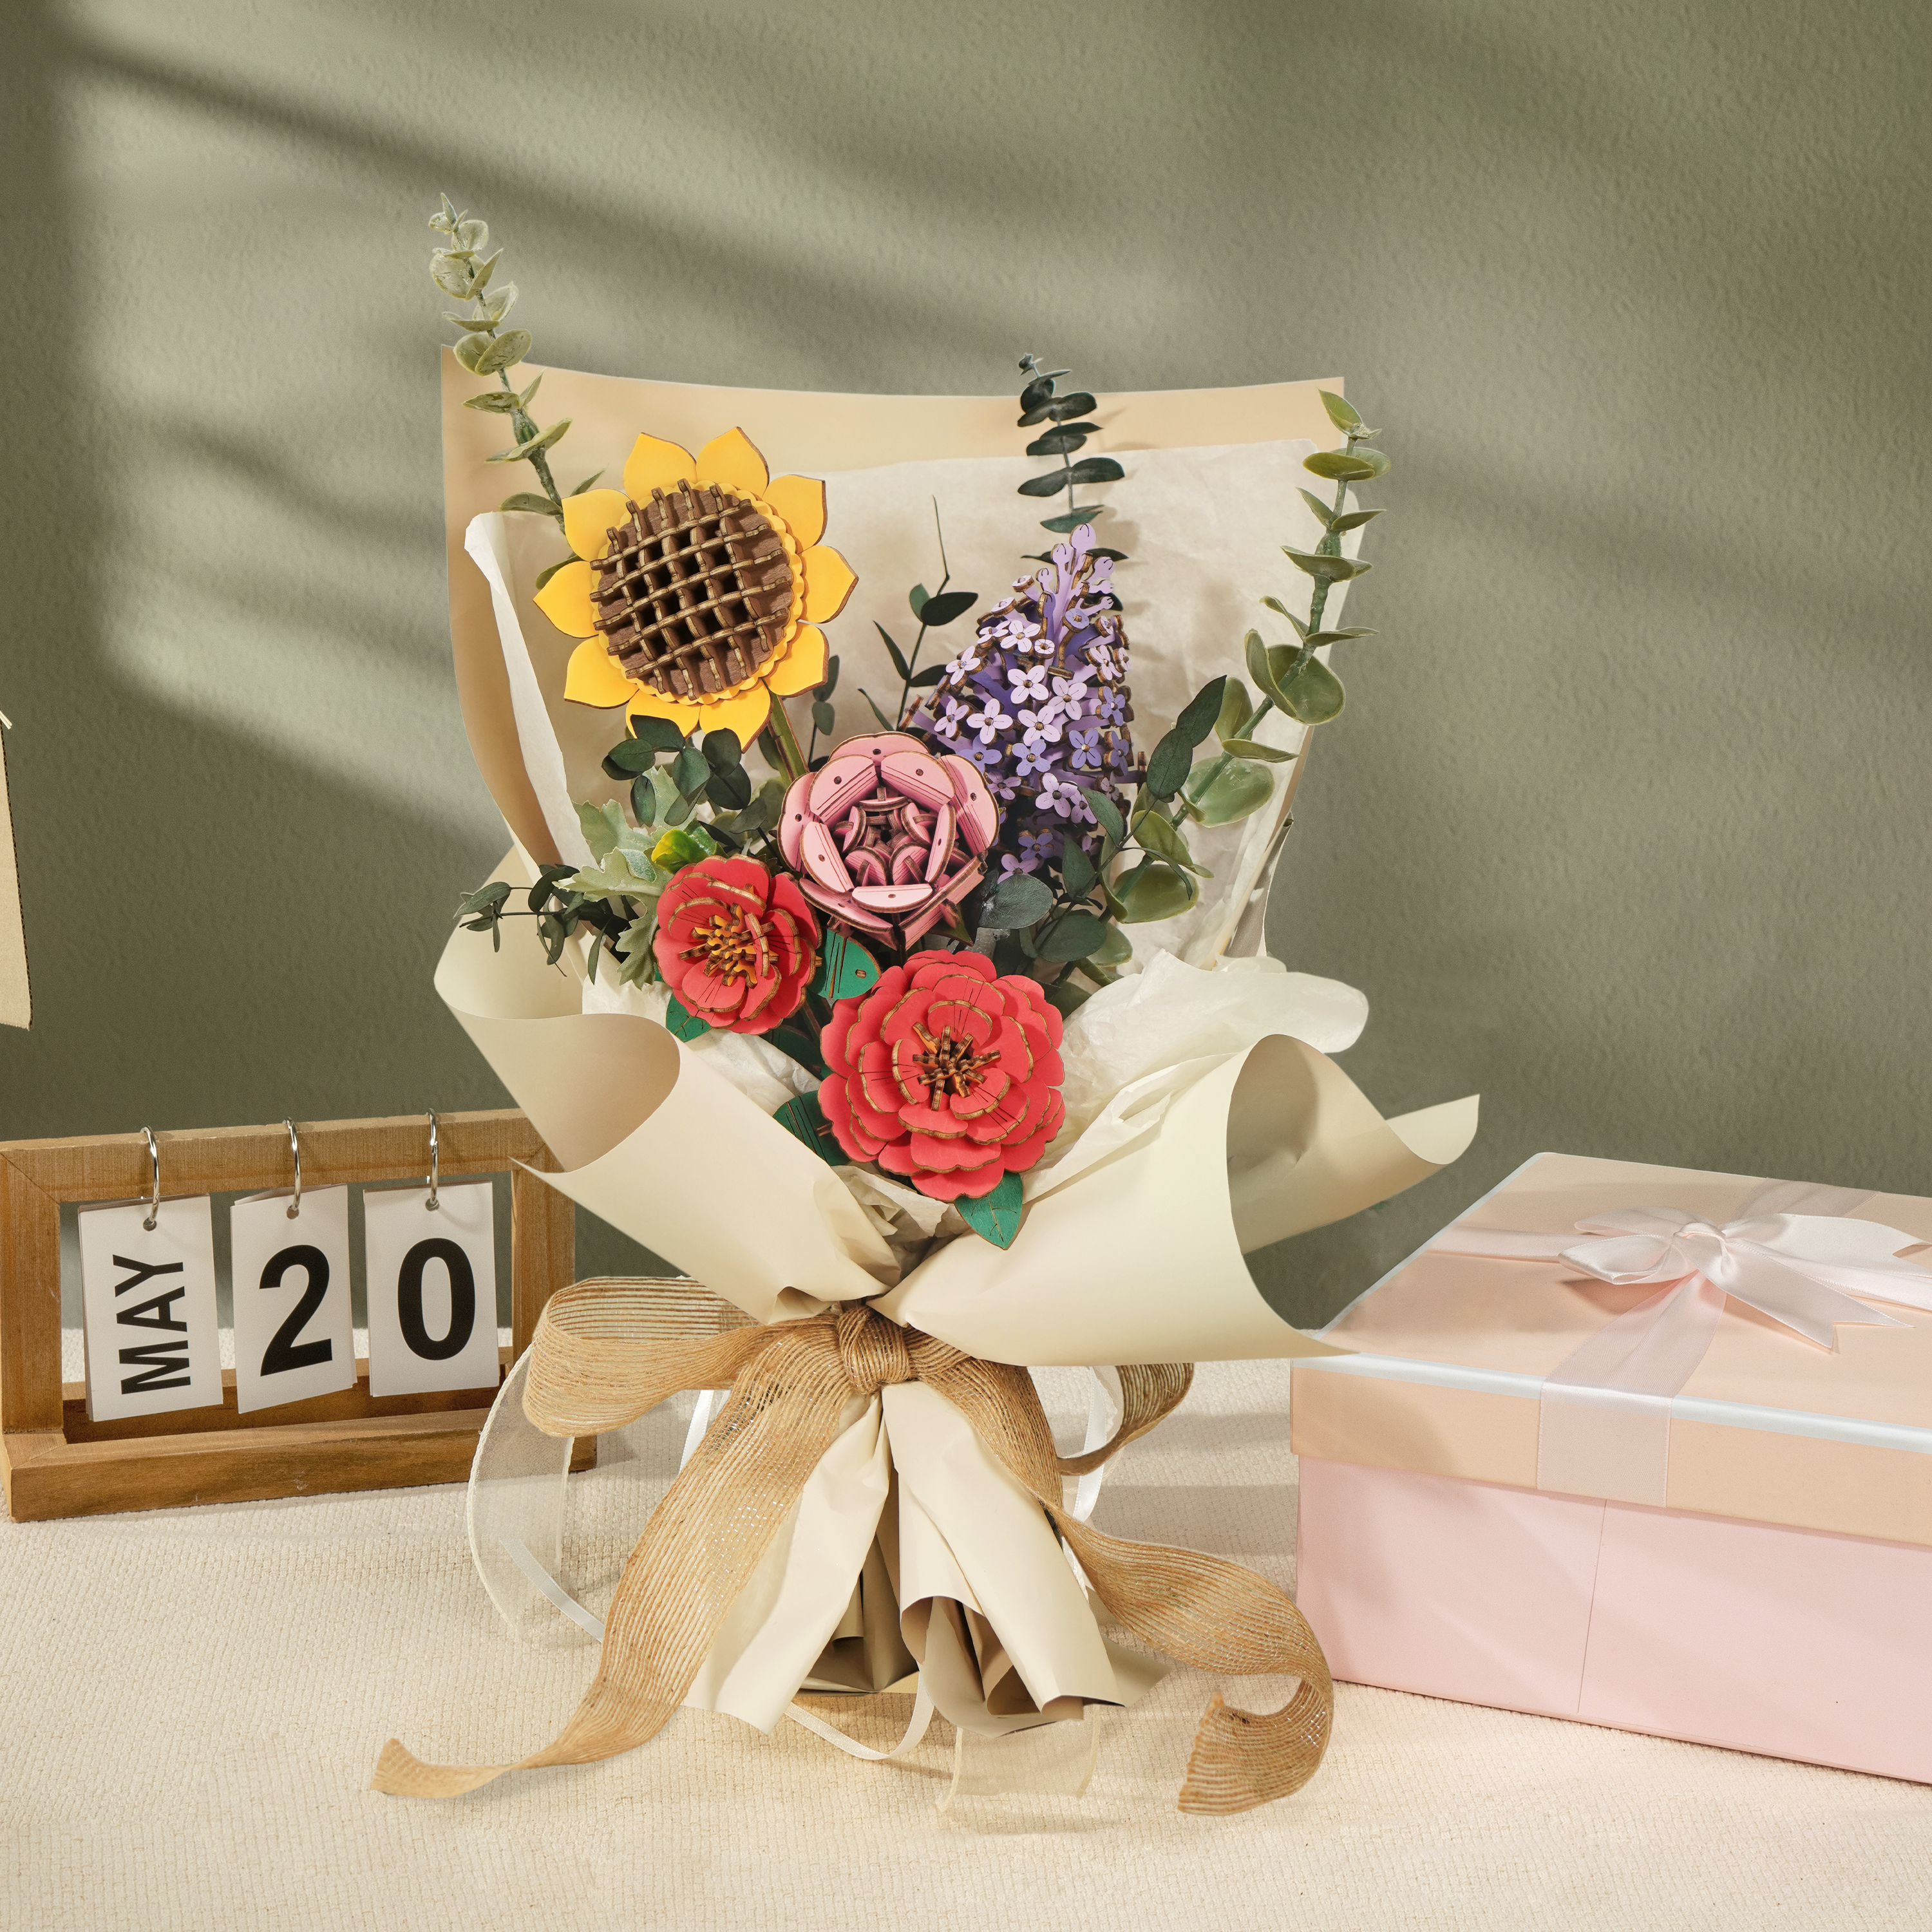 Wooden Flower Combo | Rowood TW011/TW021/TW031/TW041 Wooden Flower Hand-Made Combo Craft Gift & Decoration